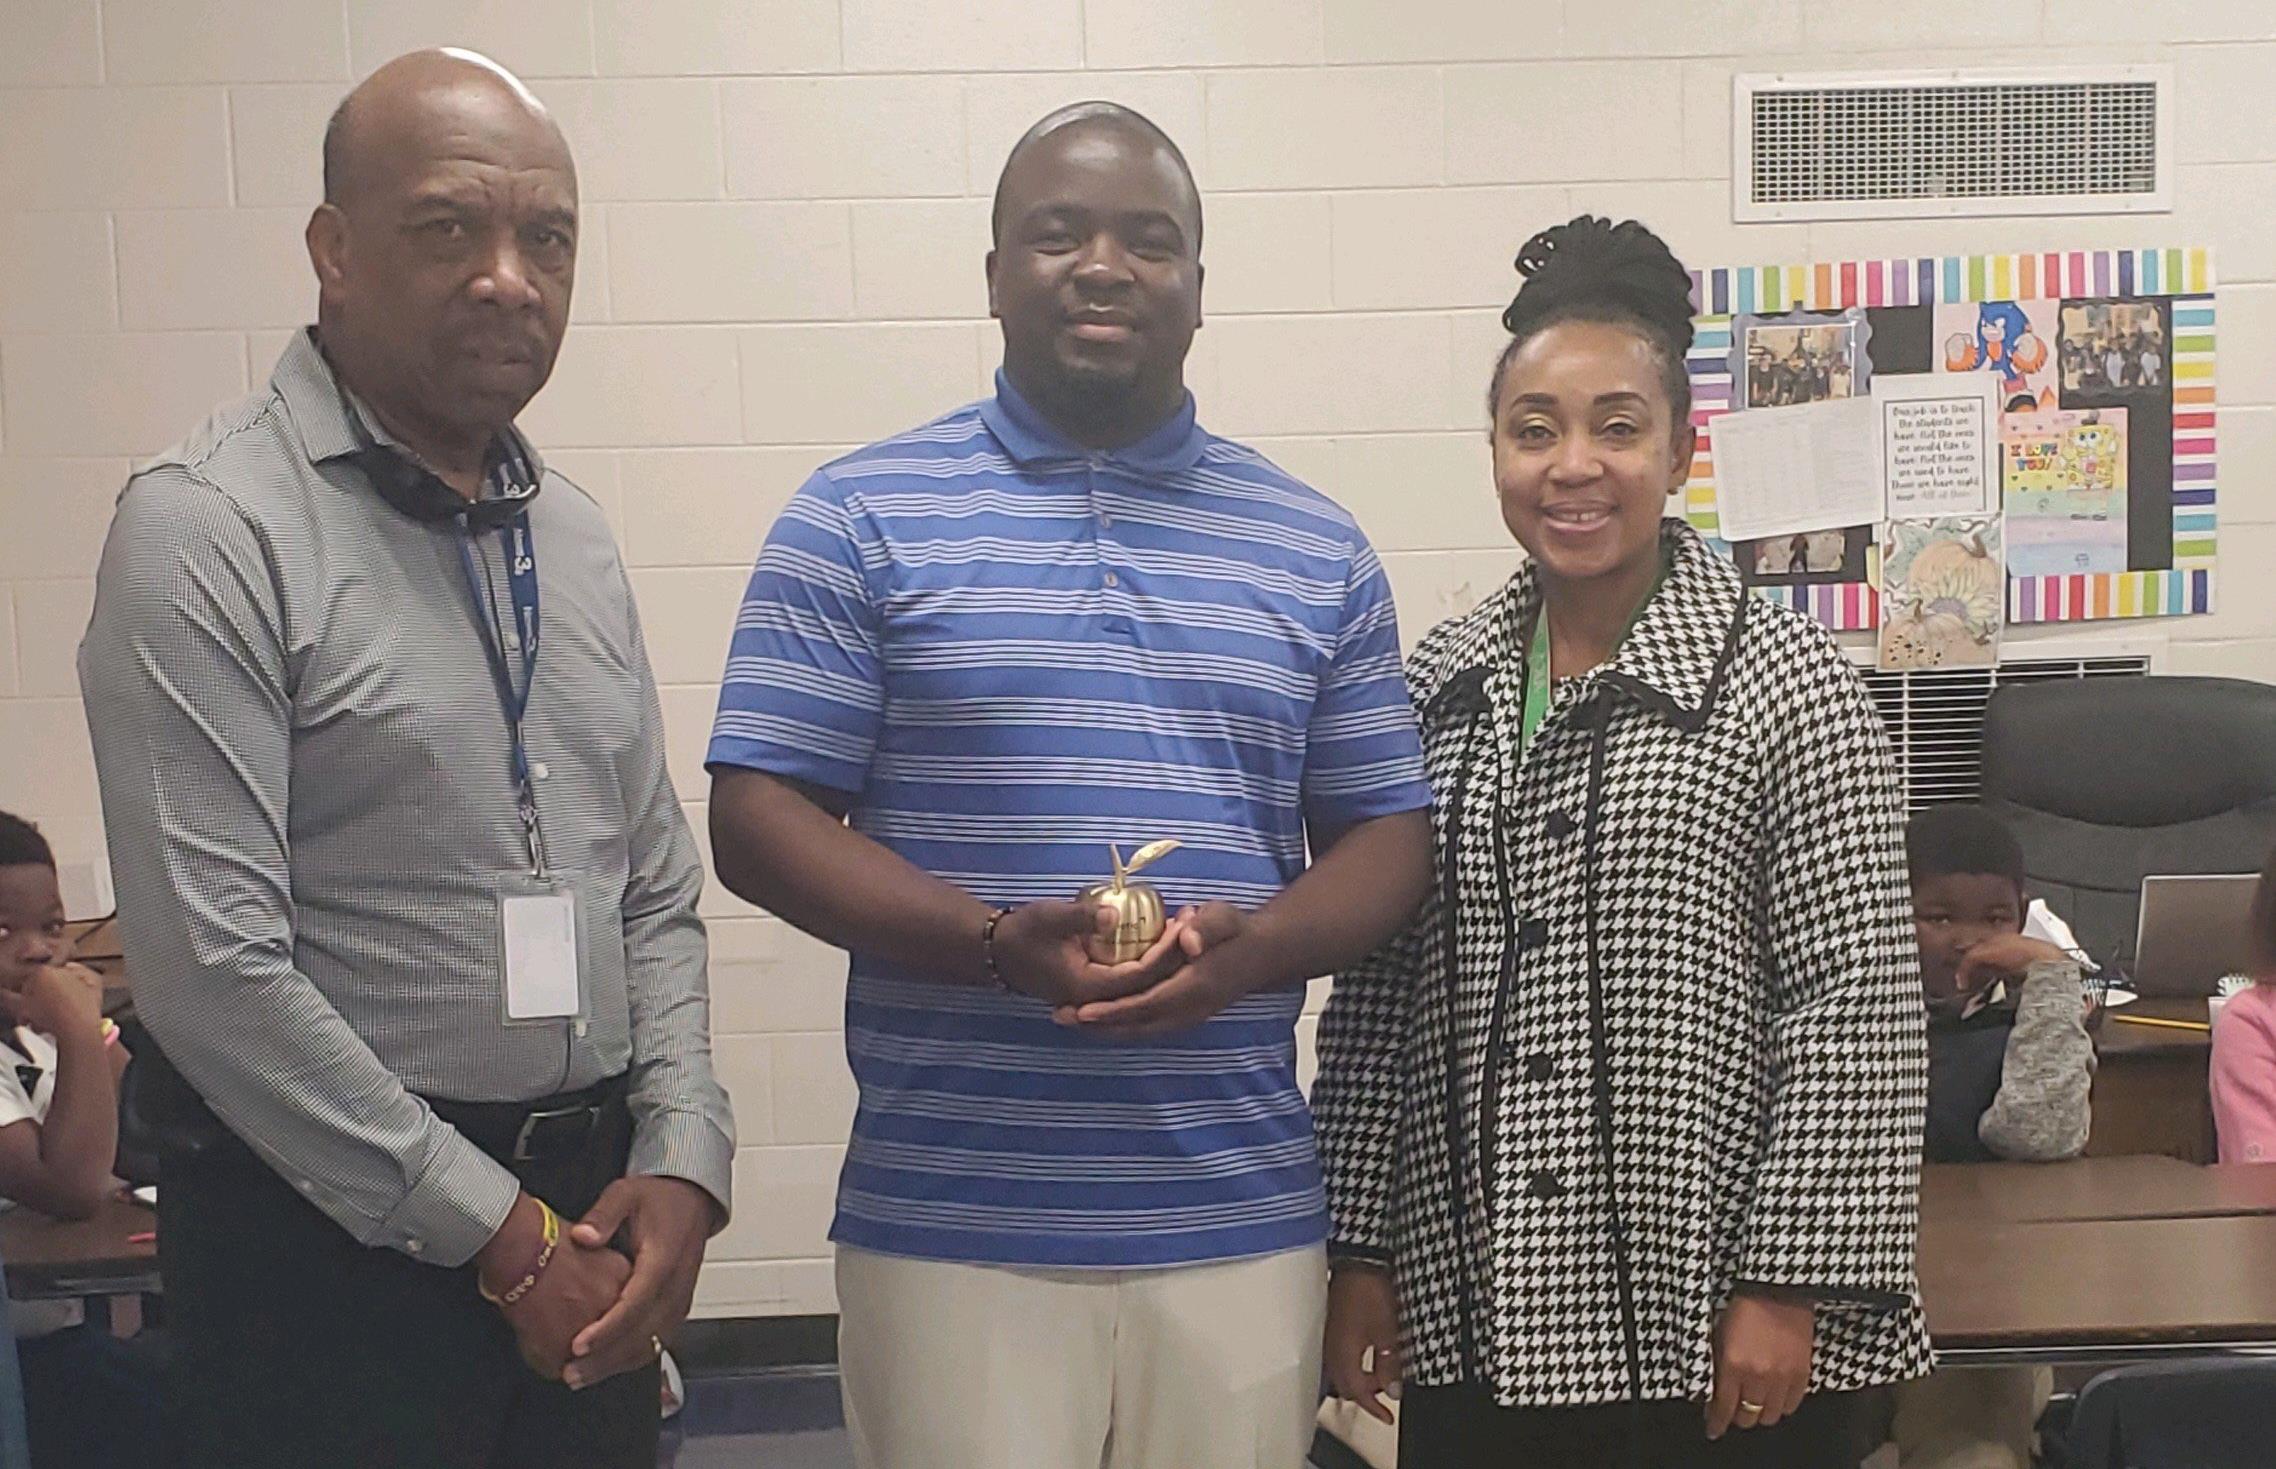 Mr. Anthony receives the Golden Apple Award